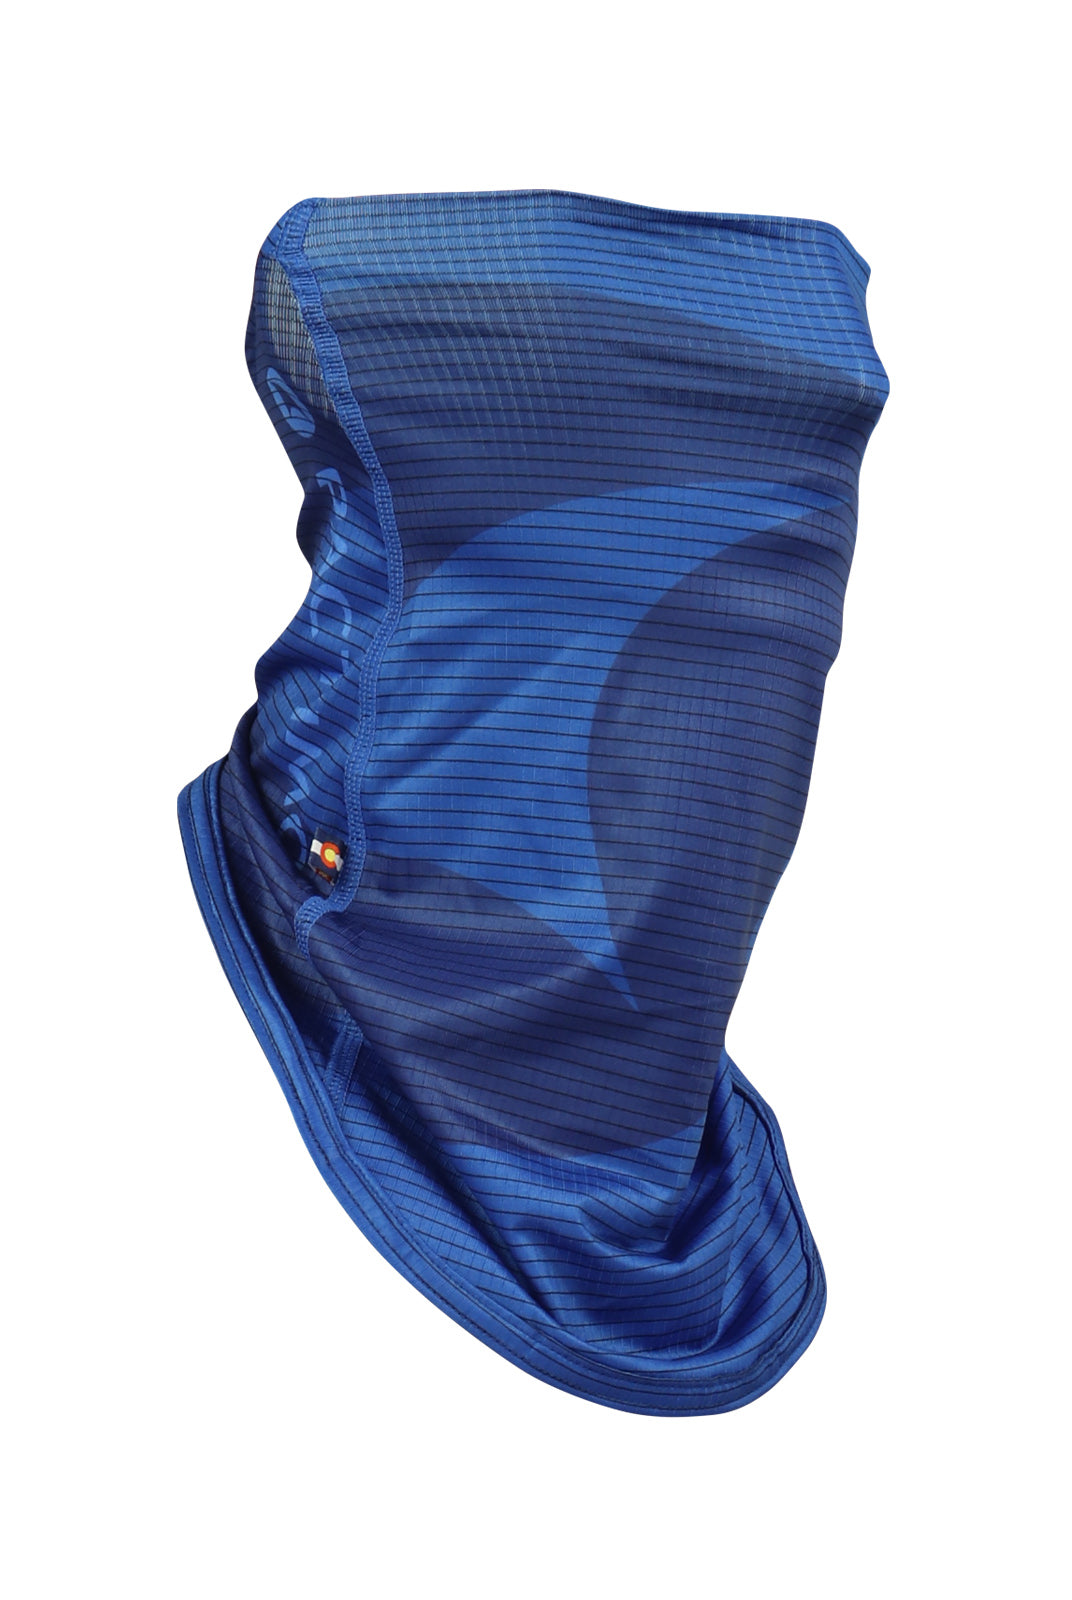 Blue Cycling Neck Gaiter - Side View